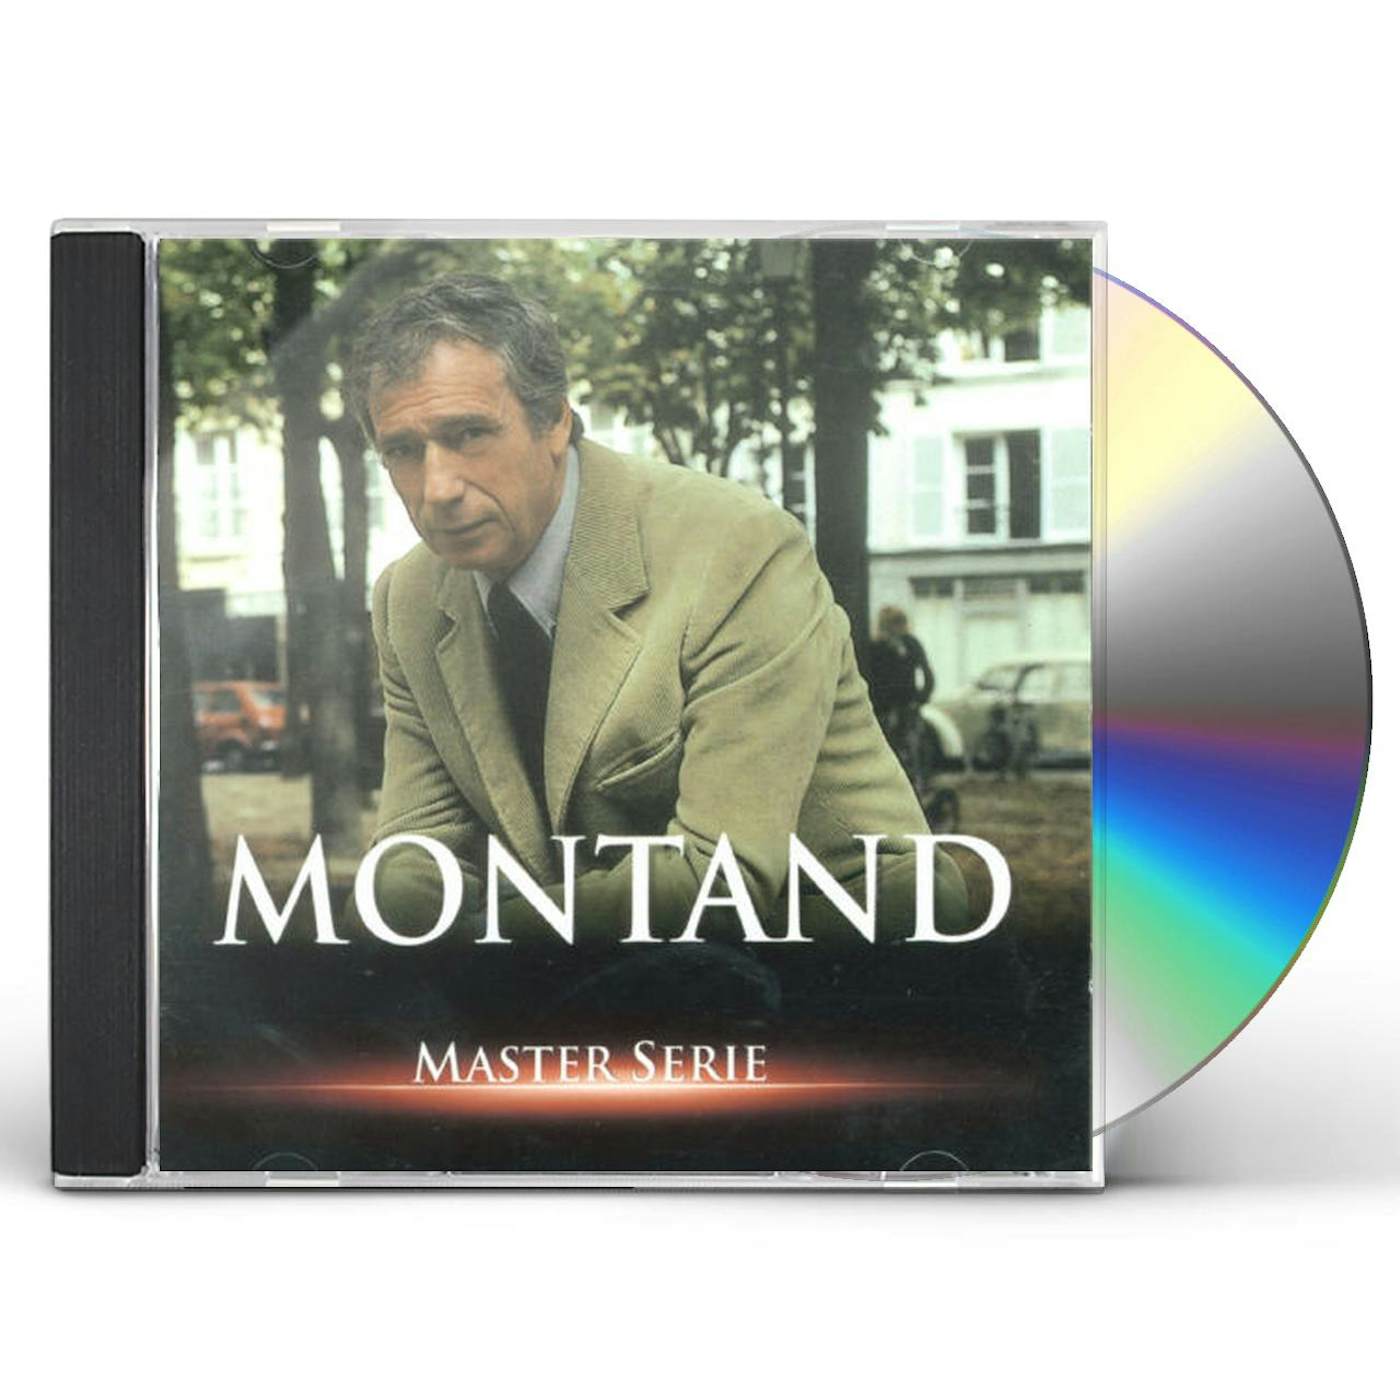 Yves Montand MASTER SERIES CD